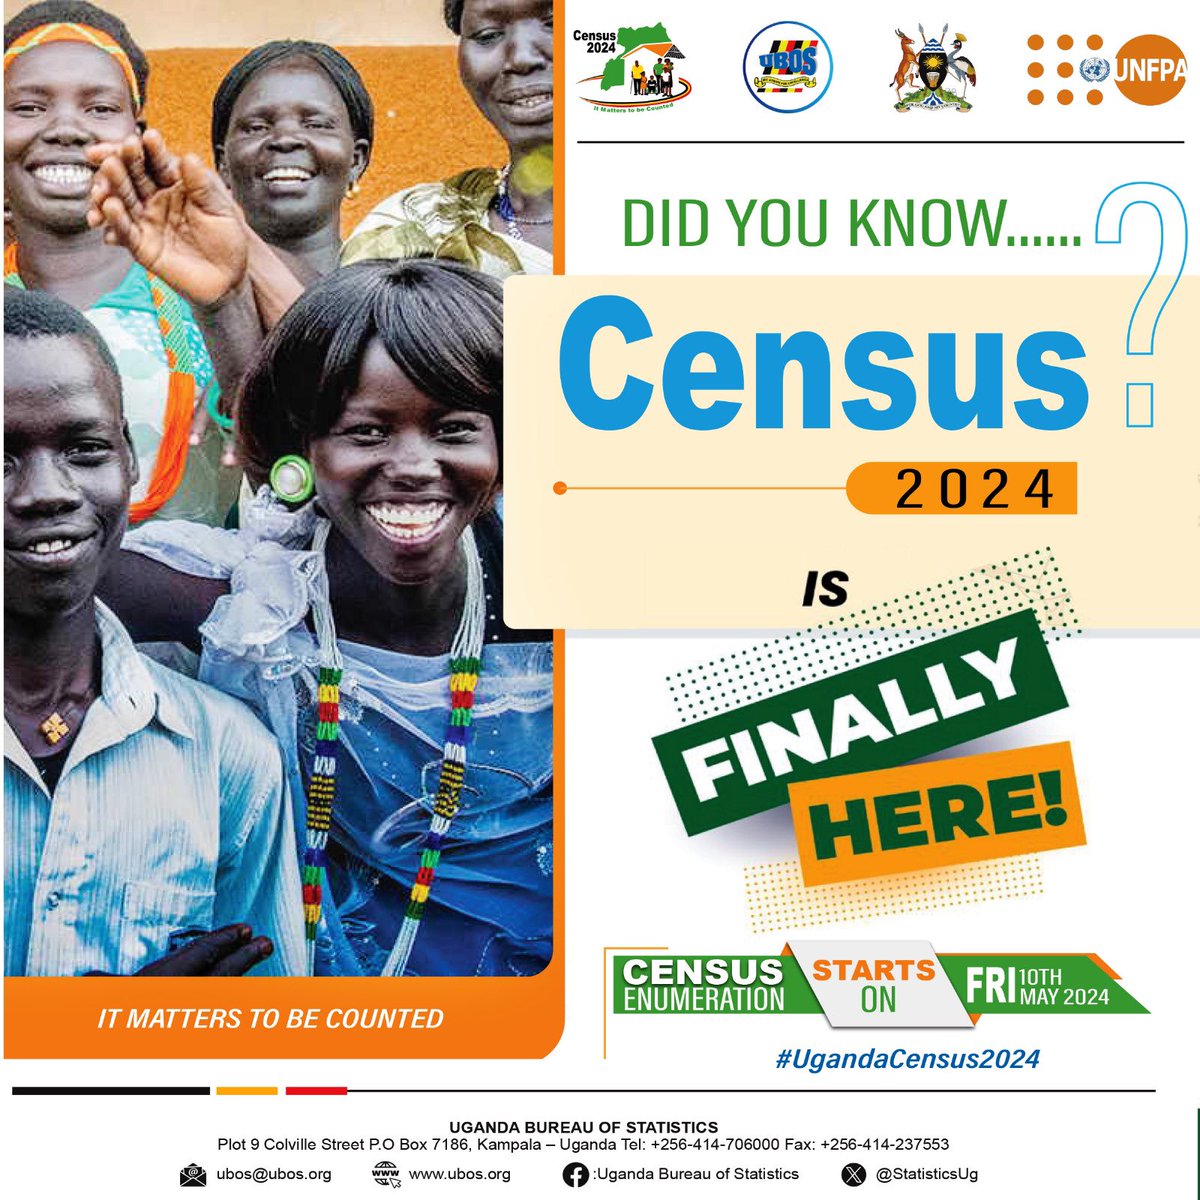 Hello good people 👋 The #UgandaCensus2024 is few days away. On the 10th of May we officially kick off. Make sure you’re counted because the it matters to be counted